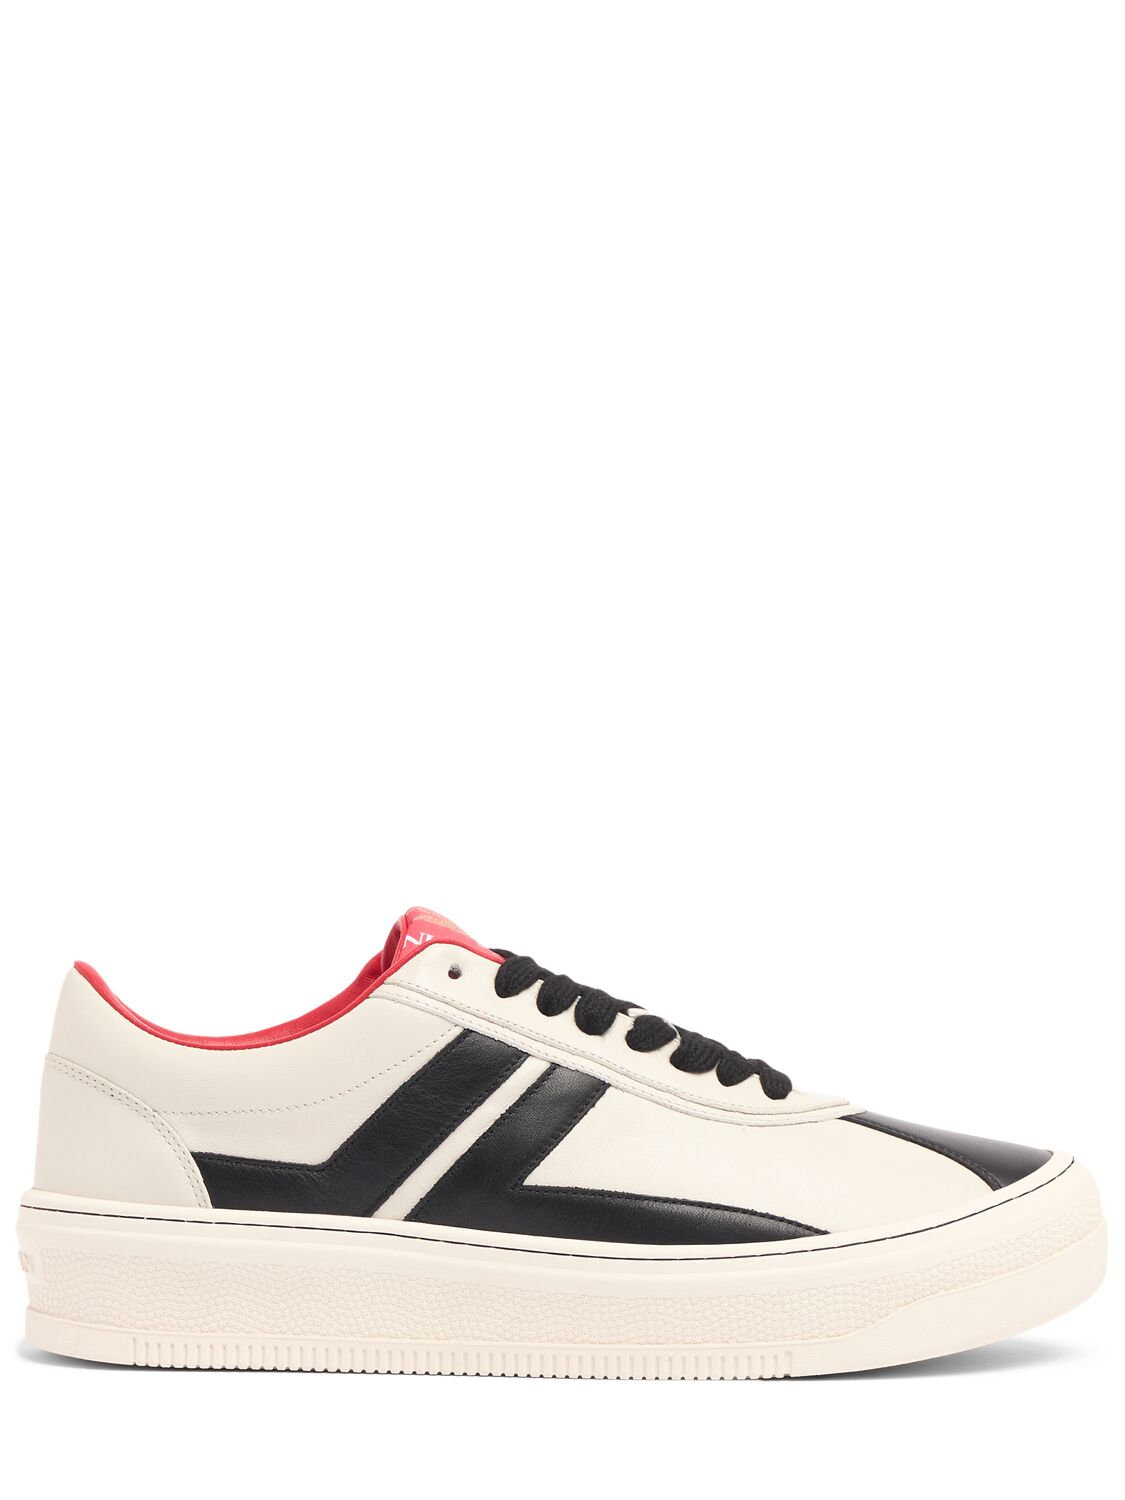 Lanvin Pluto Leather Low Top Sneakers In Off White Black